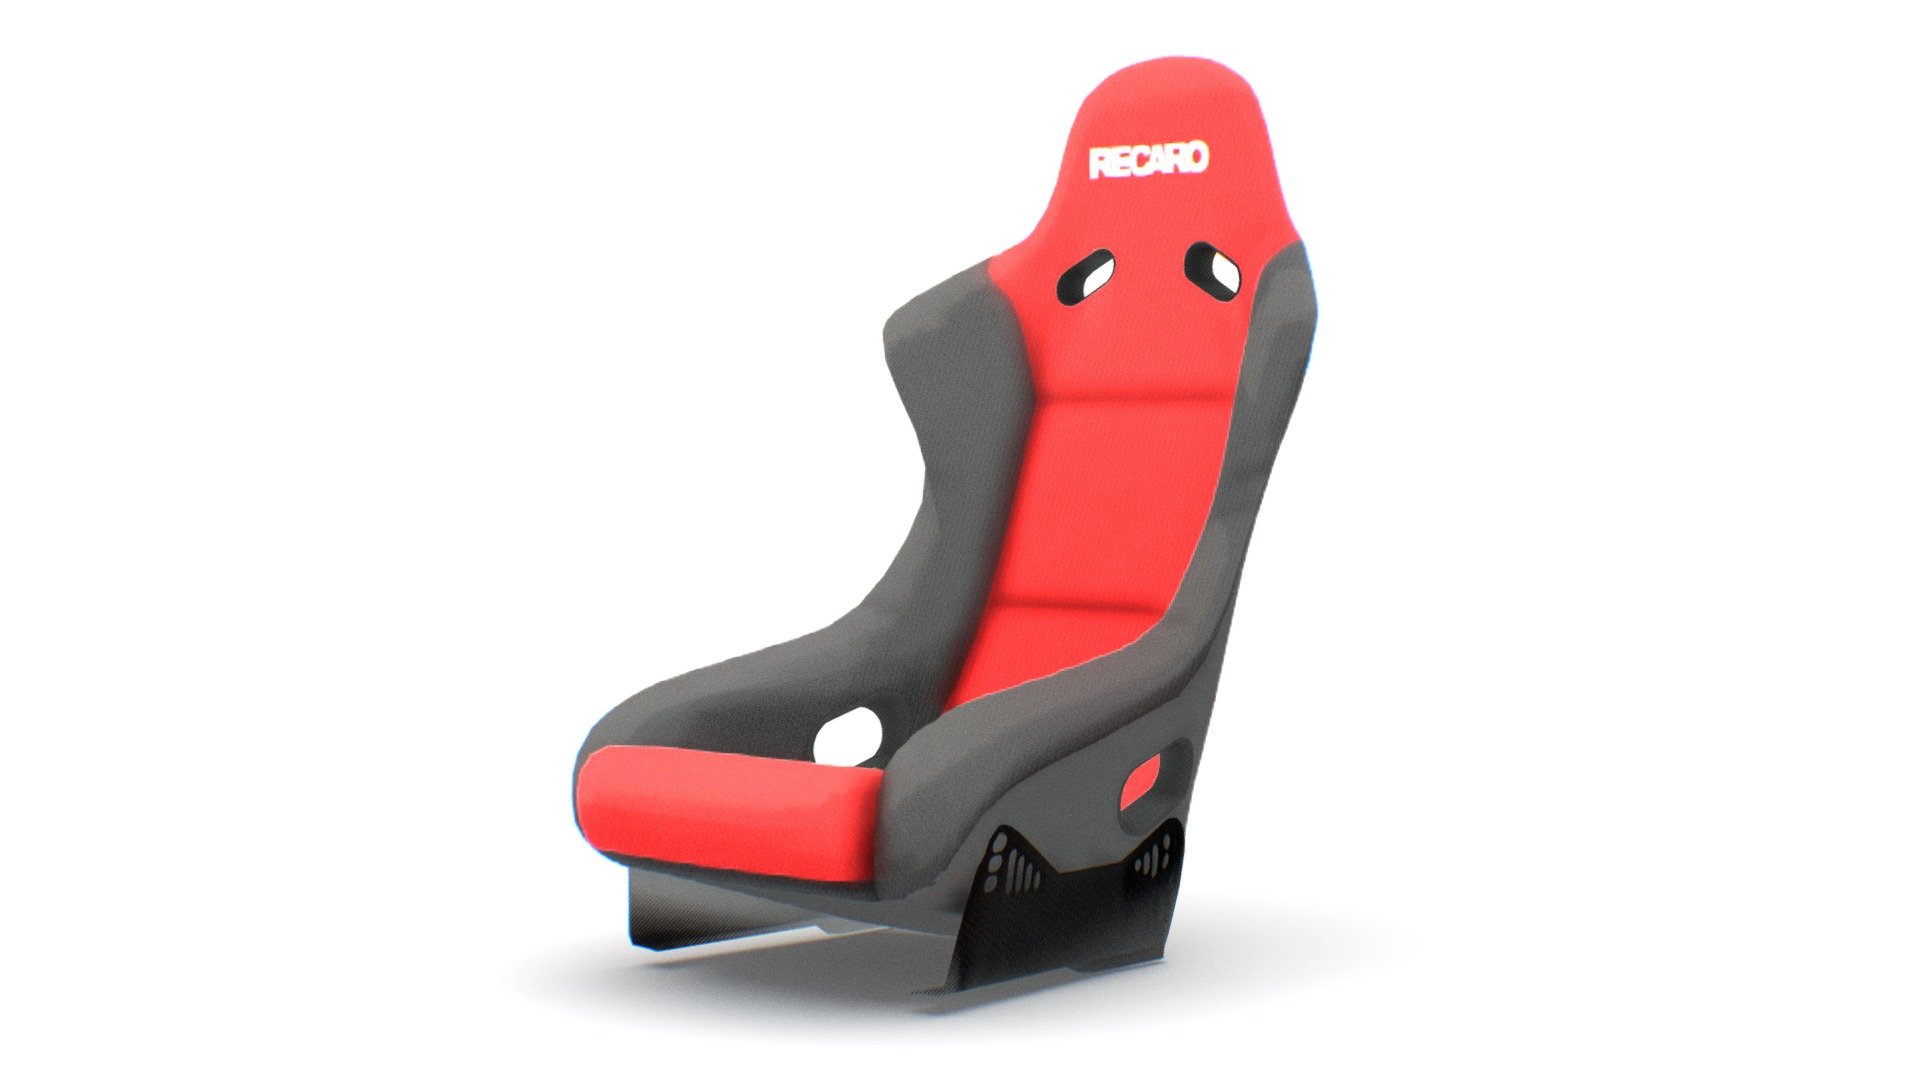 RECARO brand car seat Racing Sport Model

Software - Blender 2.93.1
Render Engine - Cycles (Can use with EEVEE also)
Polygone Count - 10,673
Vertex Count - 12,300
Meterials - Have
Source file - Have
Easy to use - Yes
Game Ready - Yes
Editable - Yes
Ready to use - Yes

Suitable for,

Racing Cars
Sport Cars
Car Modifications
Vehicle based projects
Games
Animations
Low-poly projects
Movies
Backgrounds
Assests
Spares
Just Buy and add it to your Project.
Enjoy with Your Model 3d model